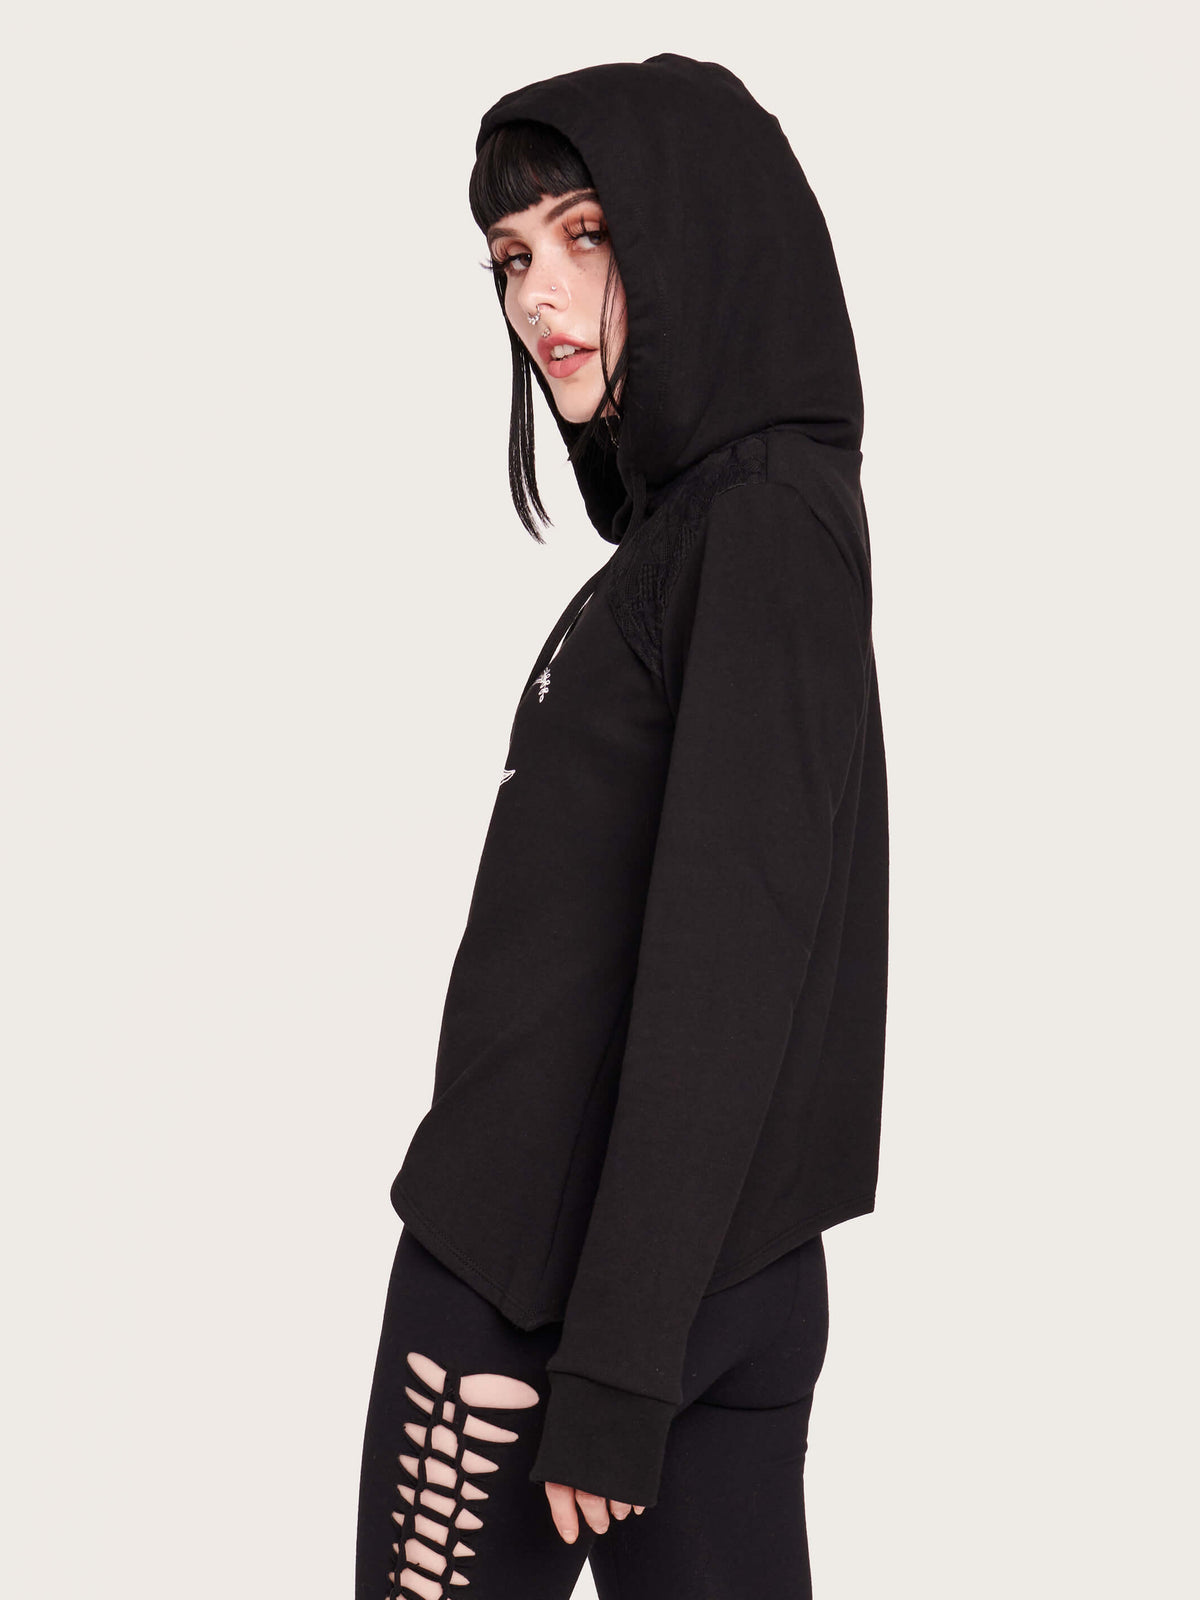 Be the hush of the night with this assymetrical hem, lace keyhole hoodie. Featuring our moon goddess sleeping bat graphic with black lace details. 100% cotton hoodie with nylon spandex lace details. witchy vibes, forest goth, bat, moon phase, crescent noon, pentacle, black lace, hoodie, nugoth, black goth, goth girl, bat girl. dark aesthetic, alt fashion.